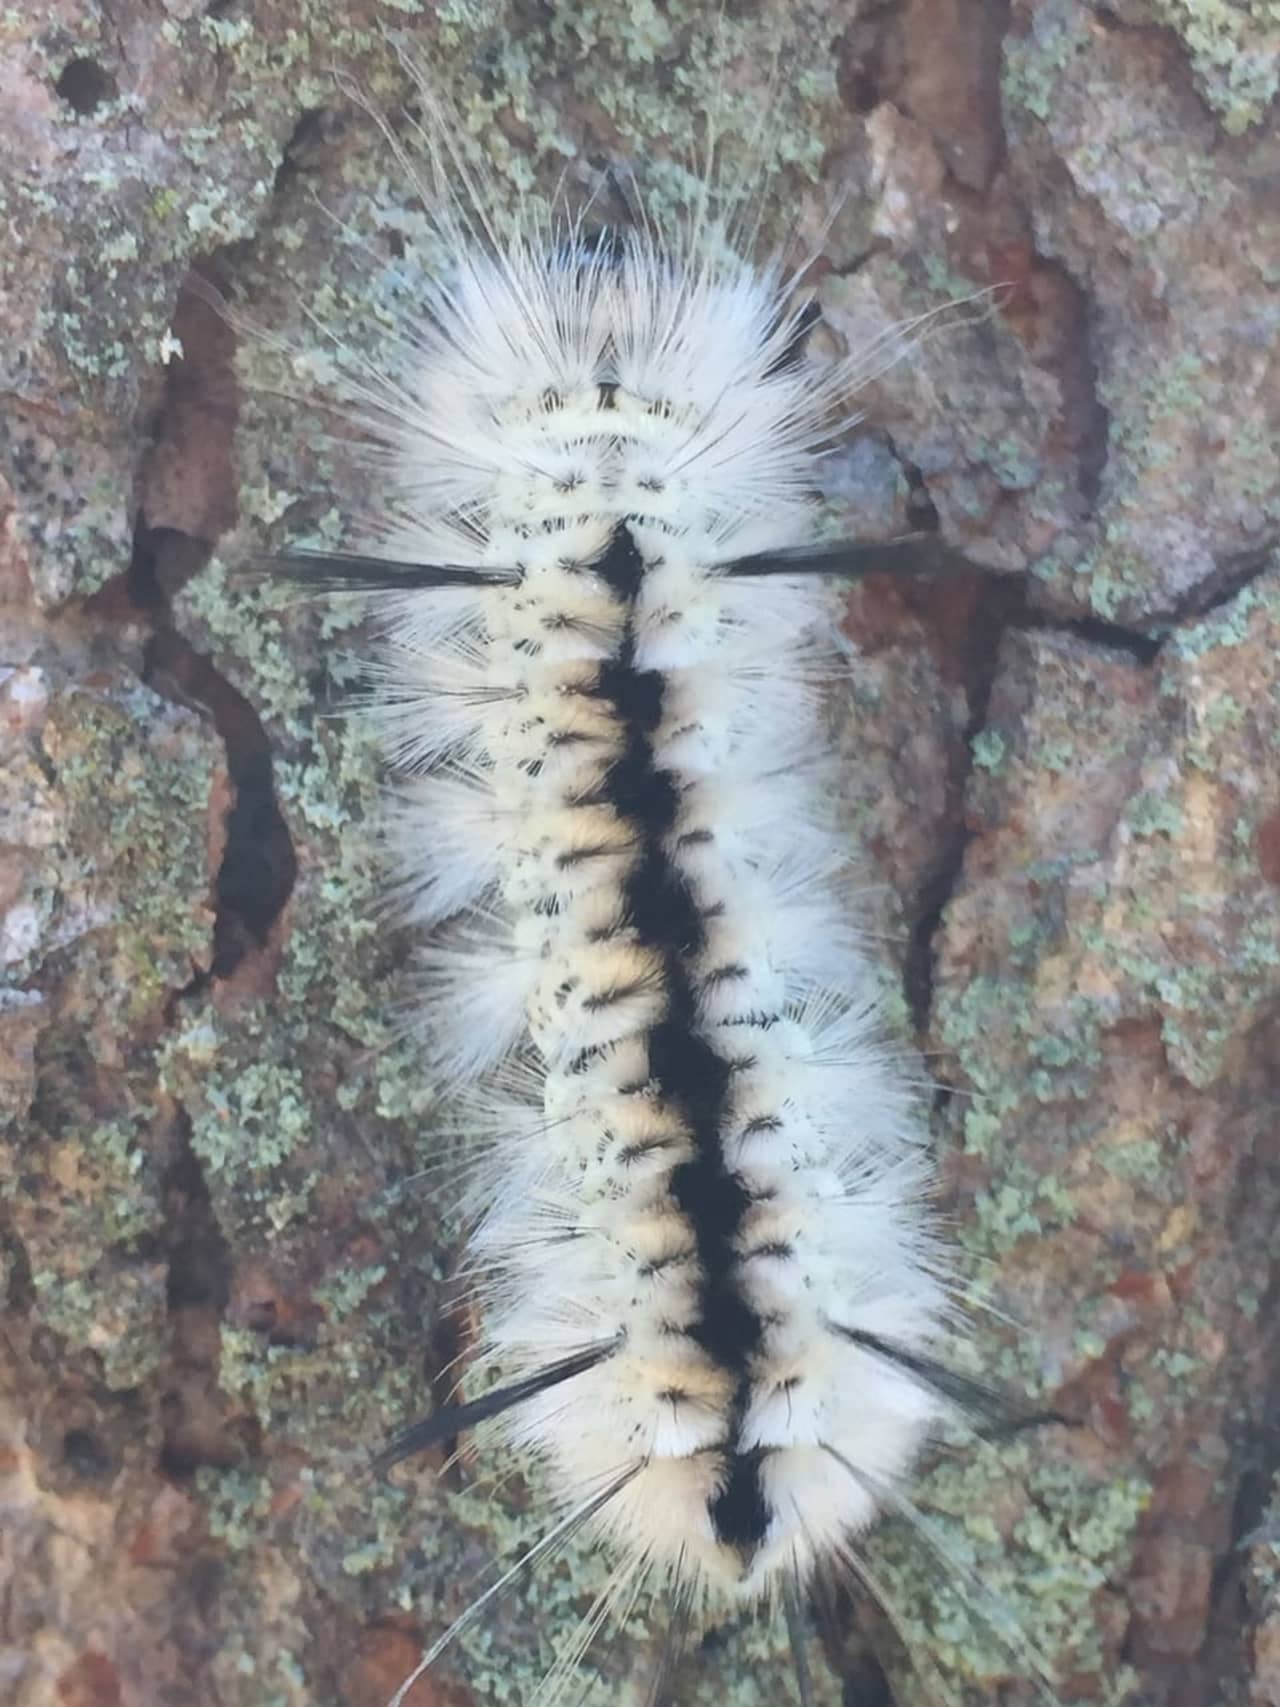 Hickory tussock moth caterpillars have been found in four Hudson Valley counties.